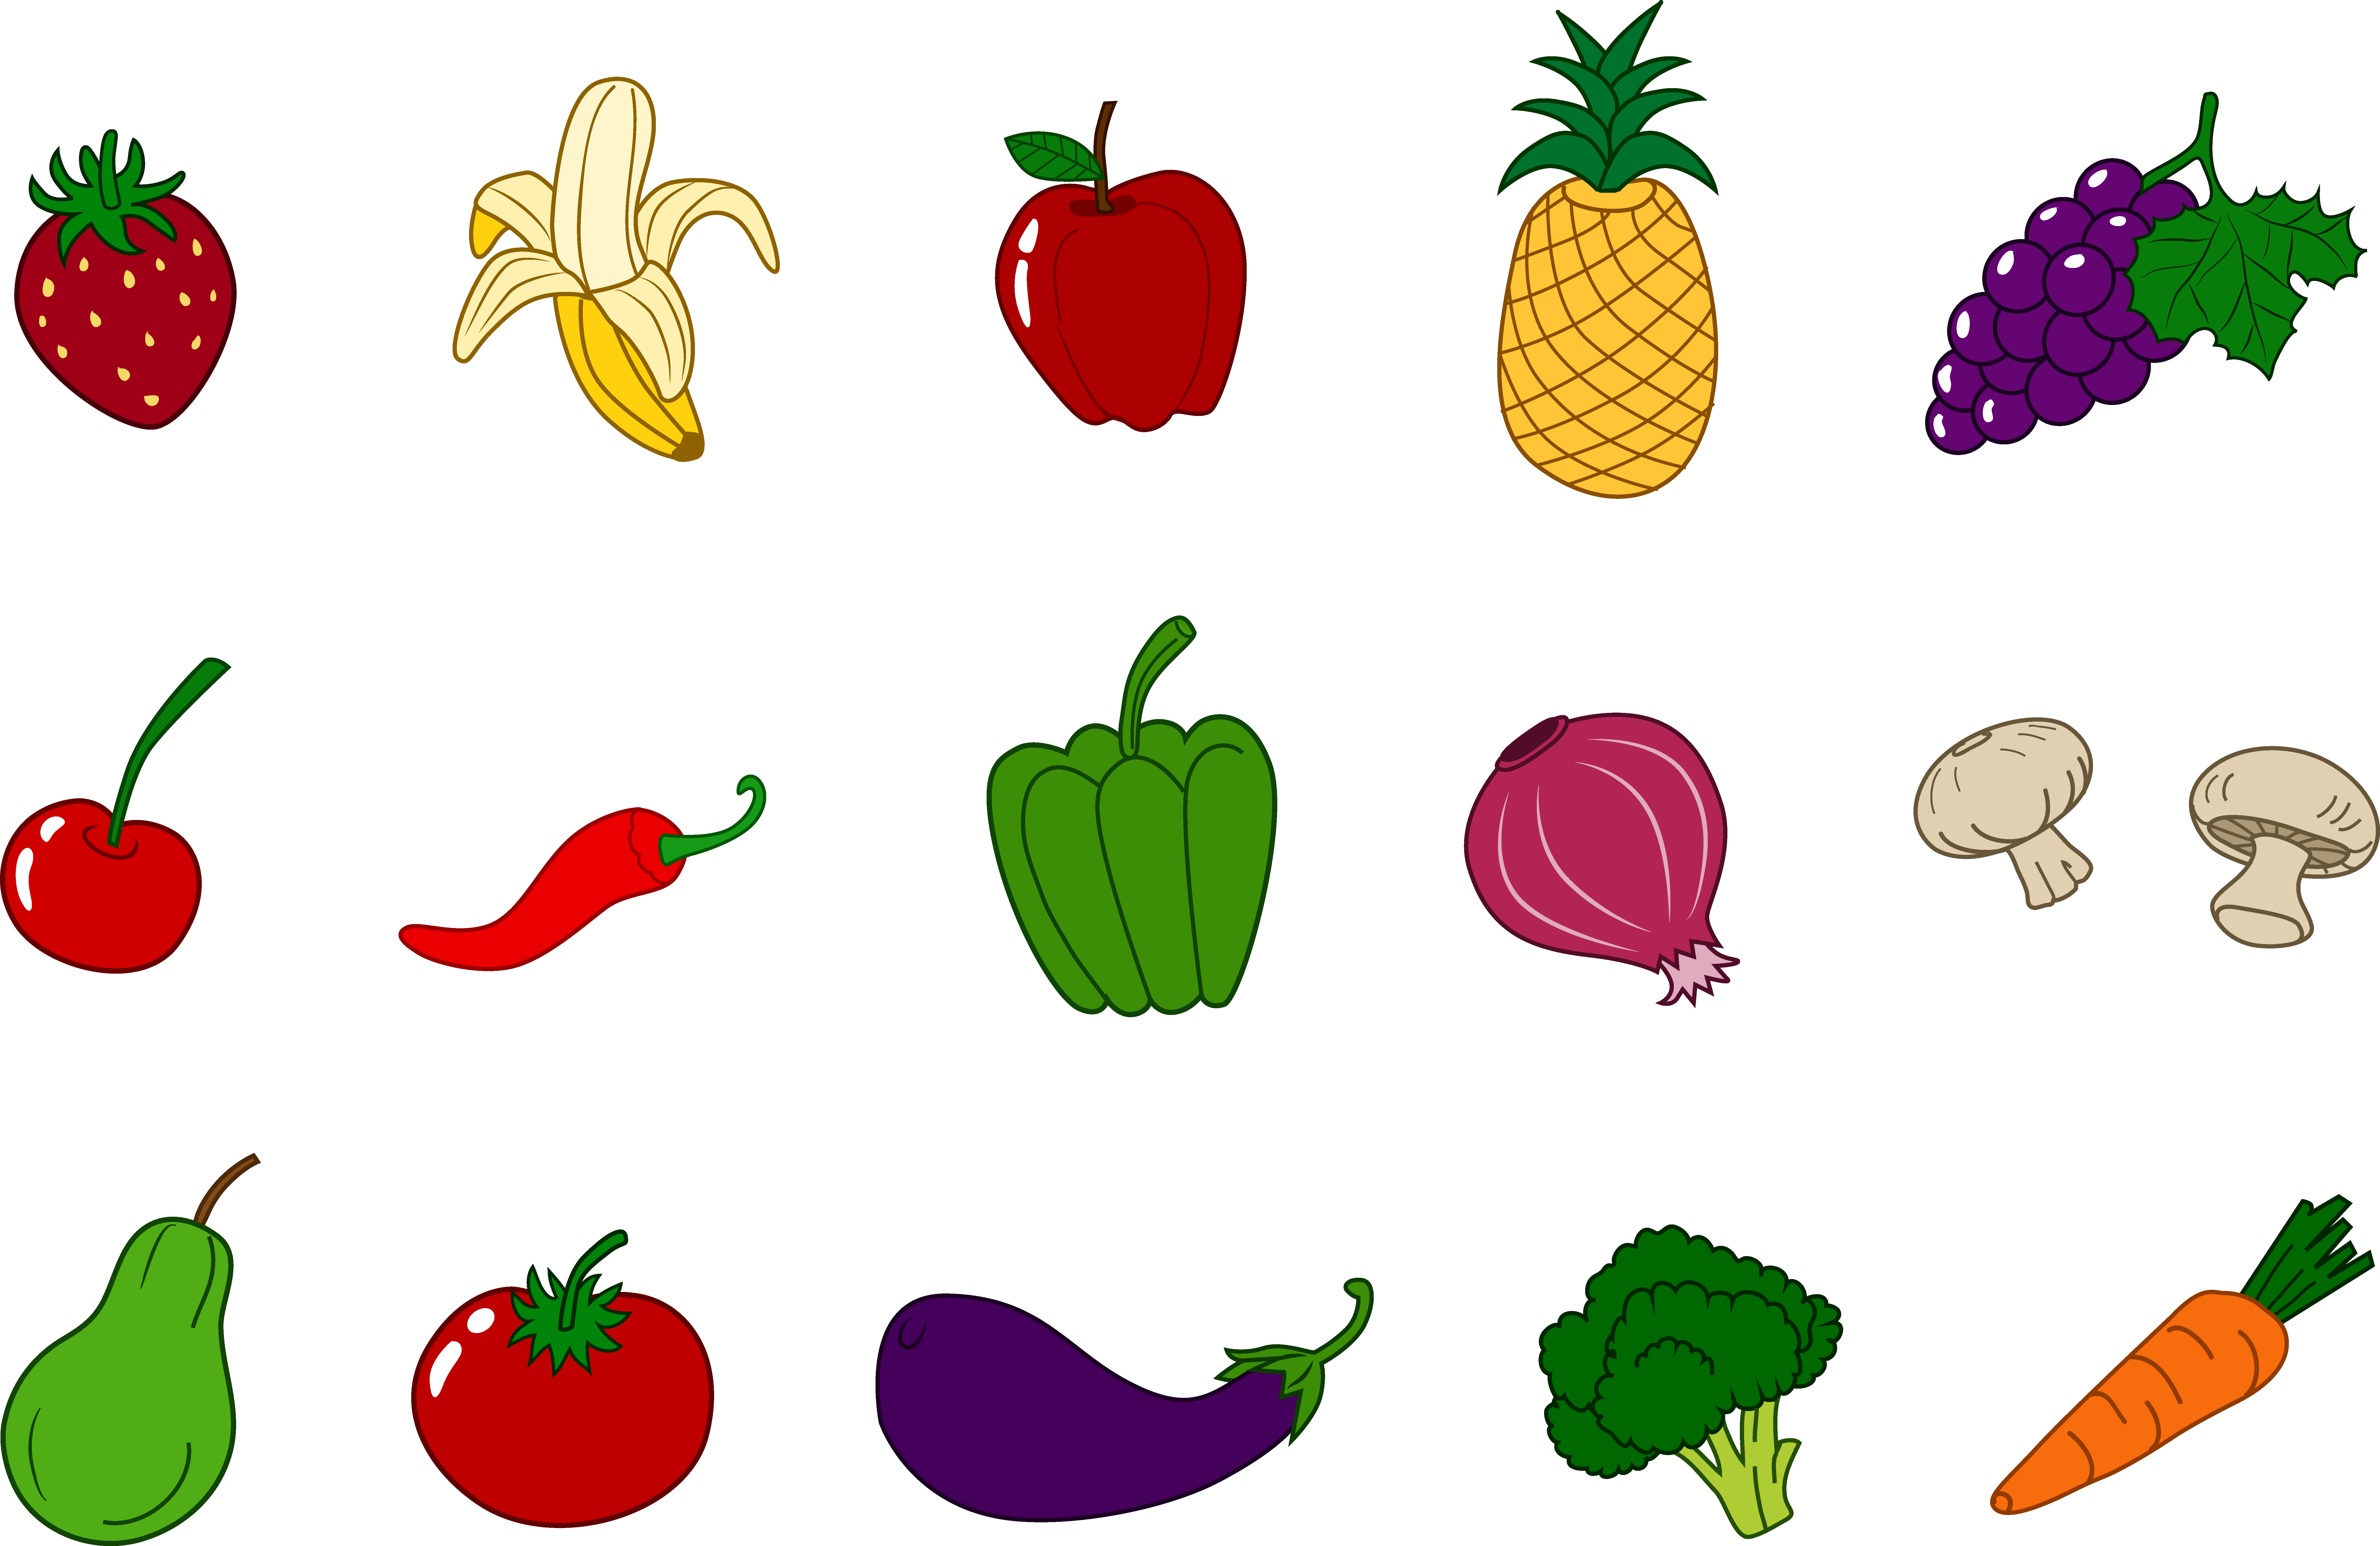 Fruits And Vegetables Clipart u0026 Fruits And Vegetables Clip Art Images -  ClipartALL clipartall.com